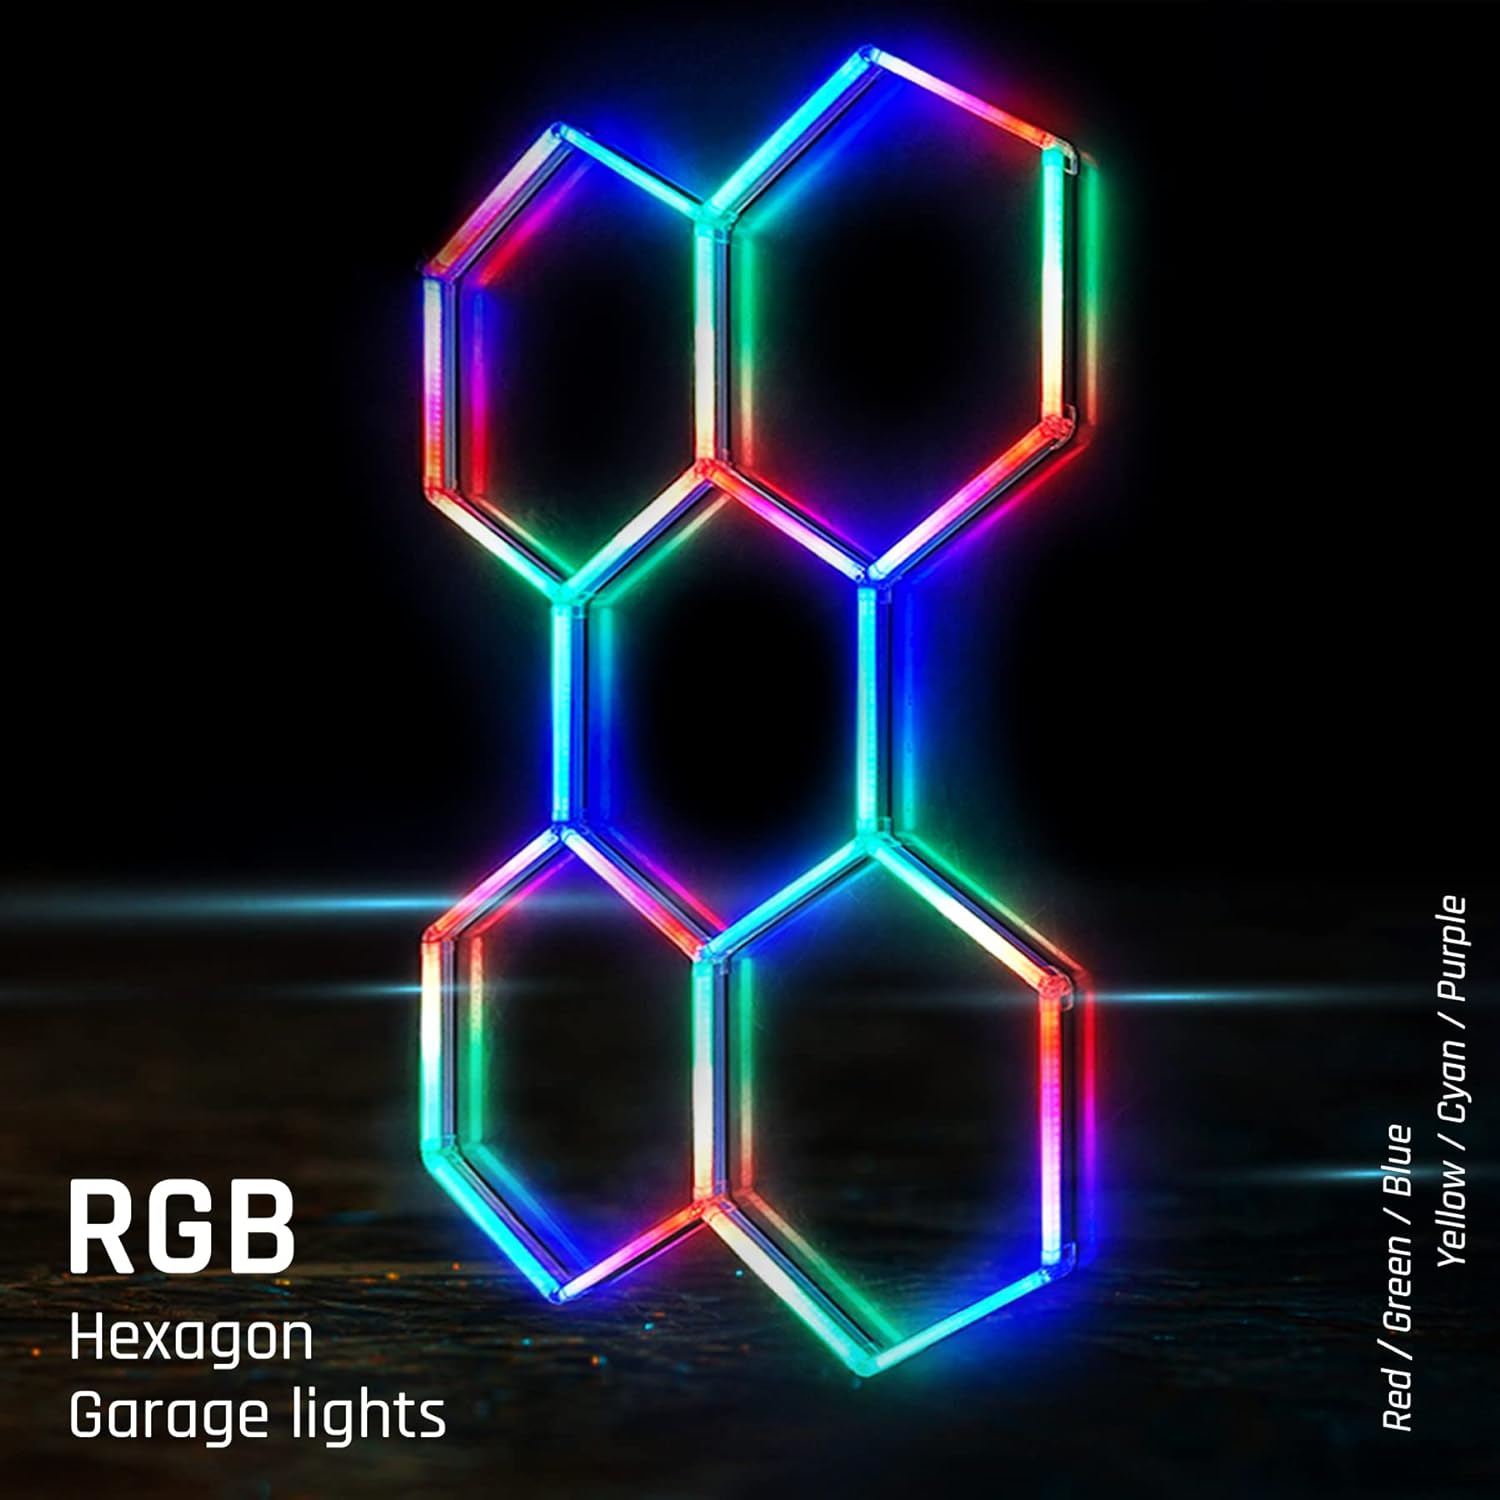 Close-up of the Colorix Hexa Garage Light RGB05's RGB LEDs, highlighting the energy-efficient, vibrant light output.